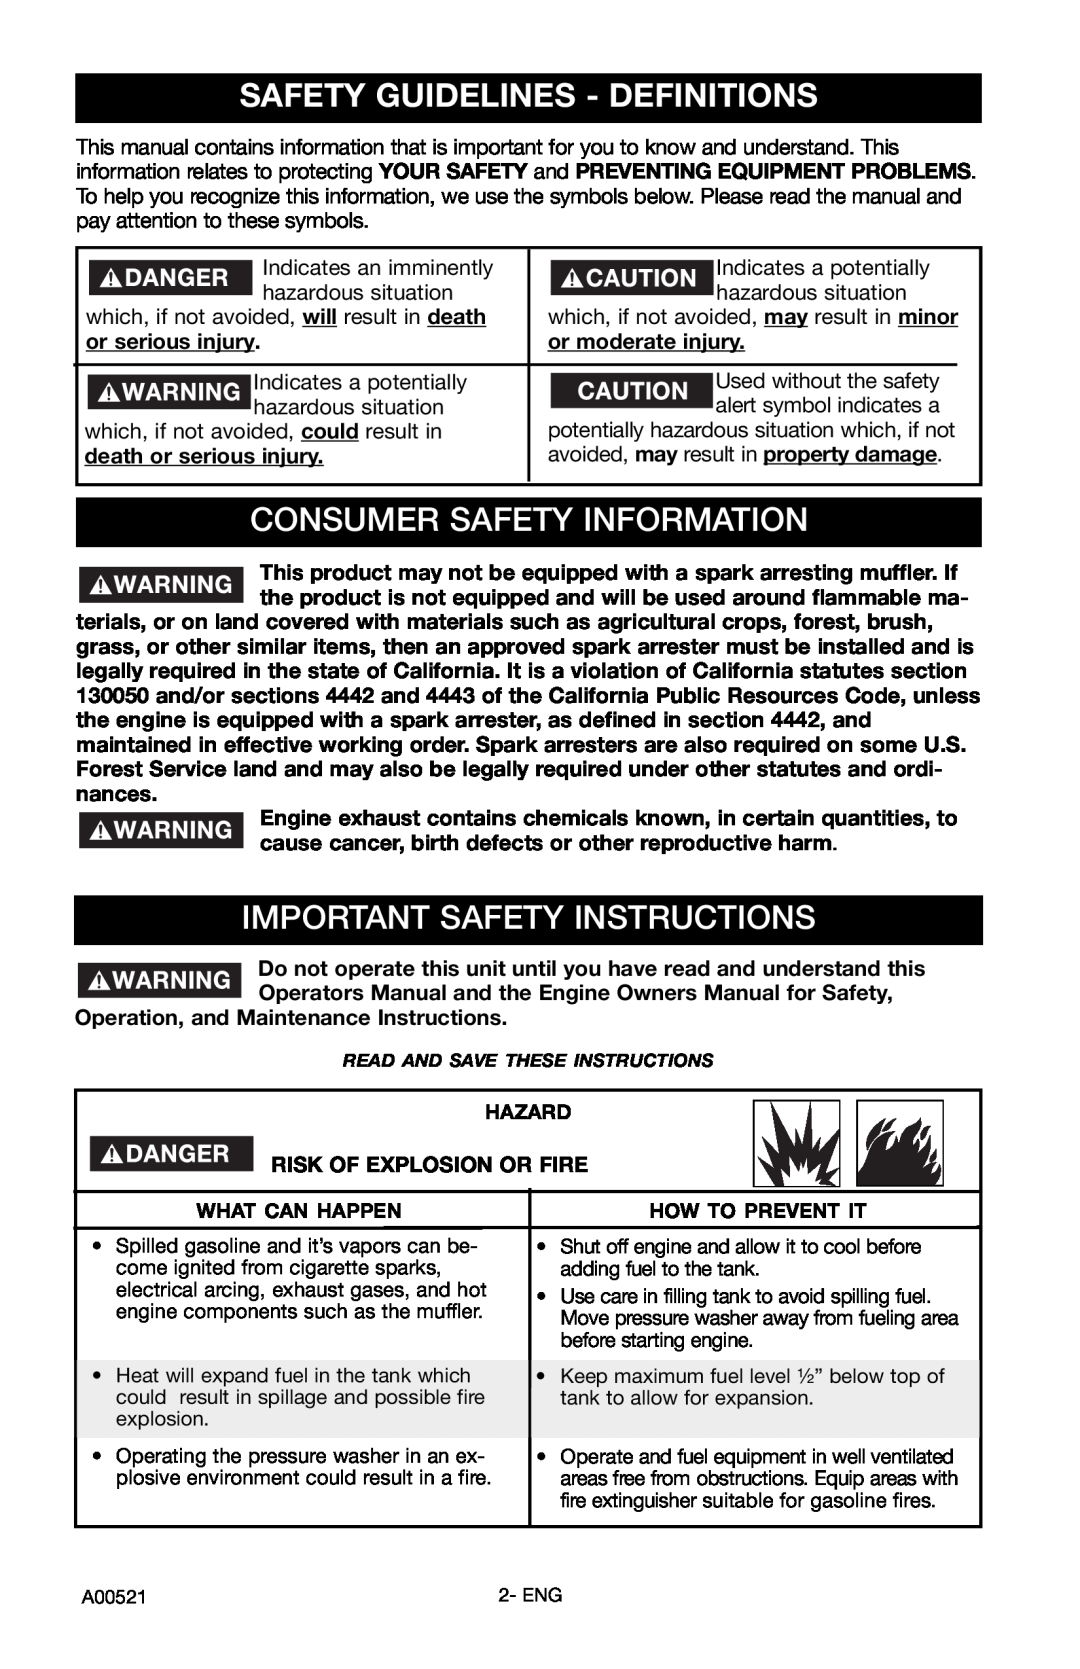 Delta DTH2450 Safety Guidelines - Definitions, Consumer Safety Information, Important Safety Instructions 